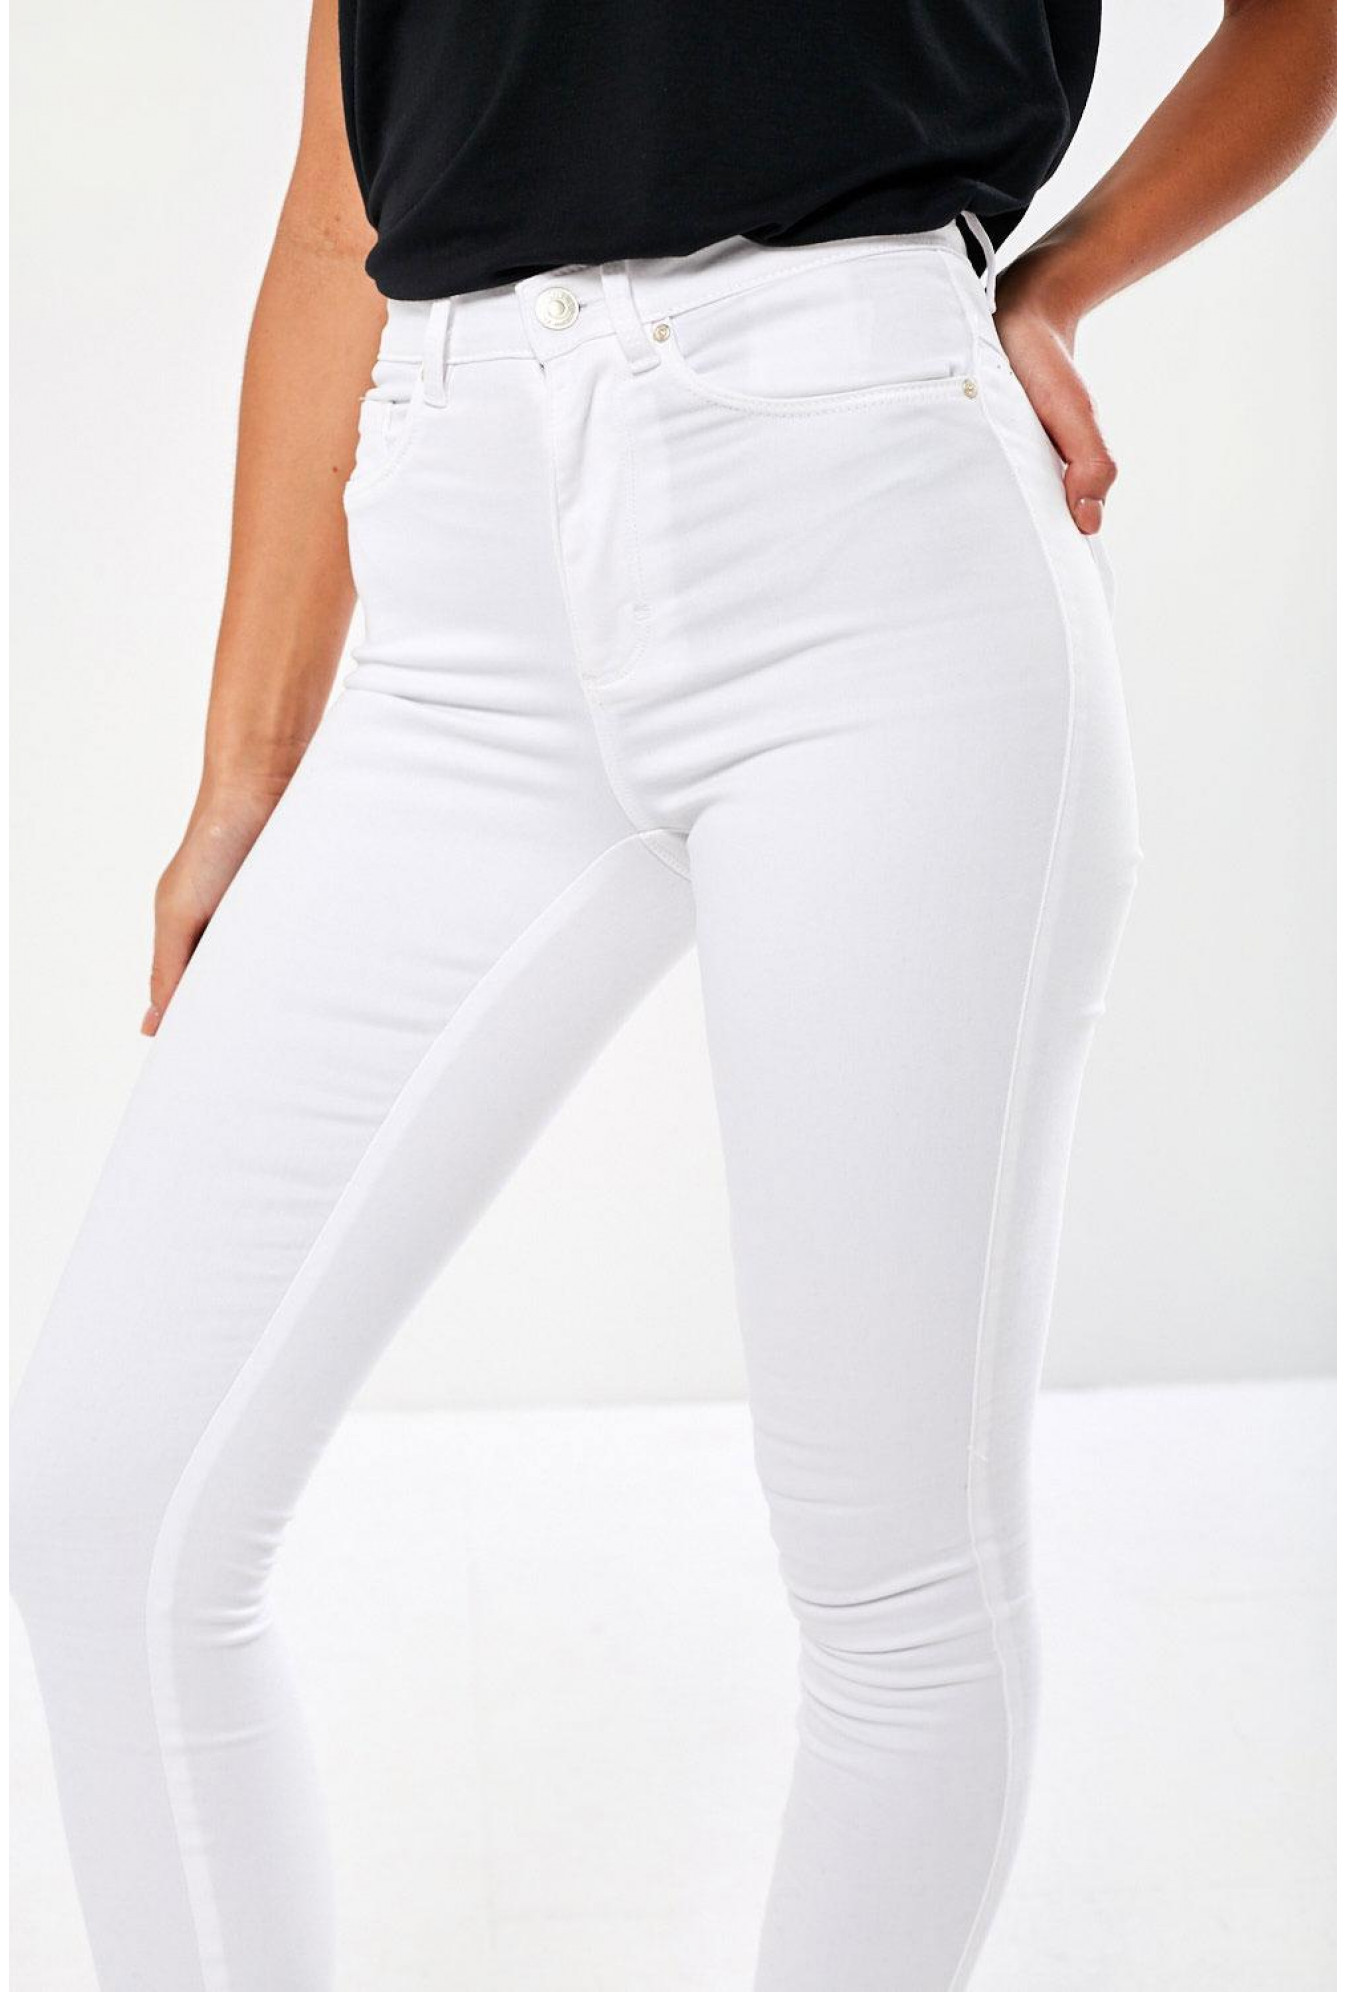 Royal High Rise Skinny Jeans in White